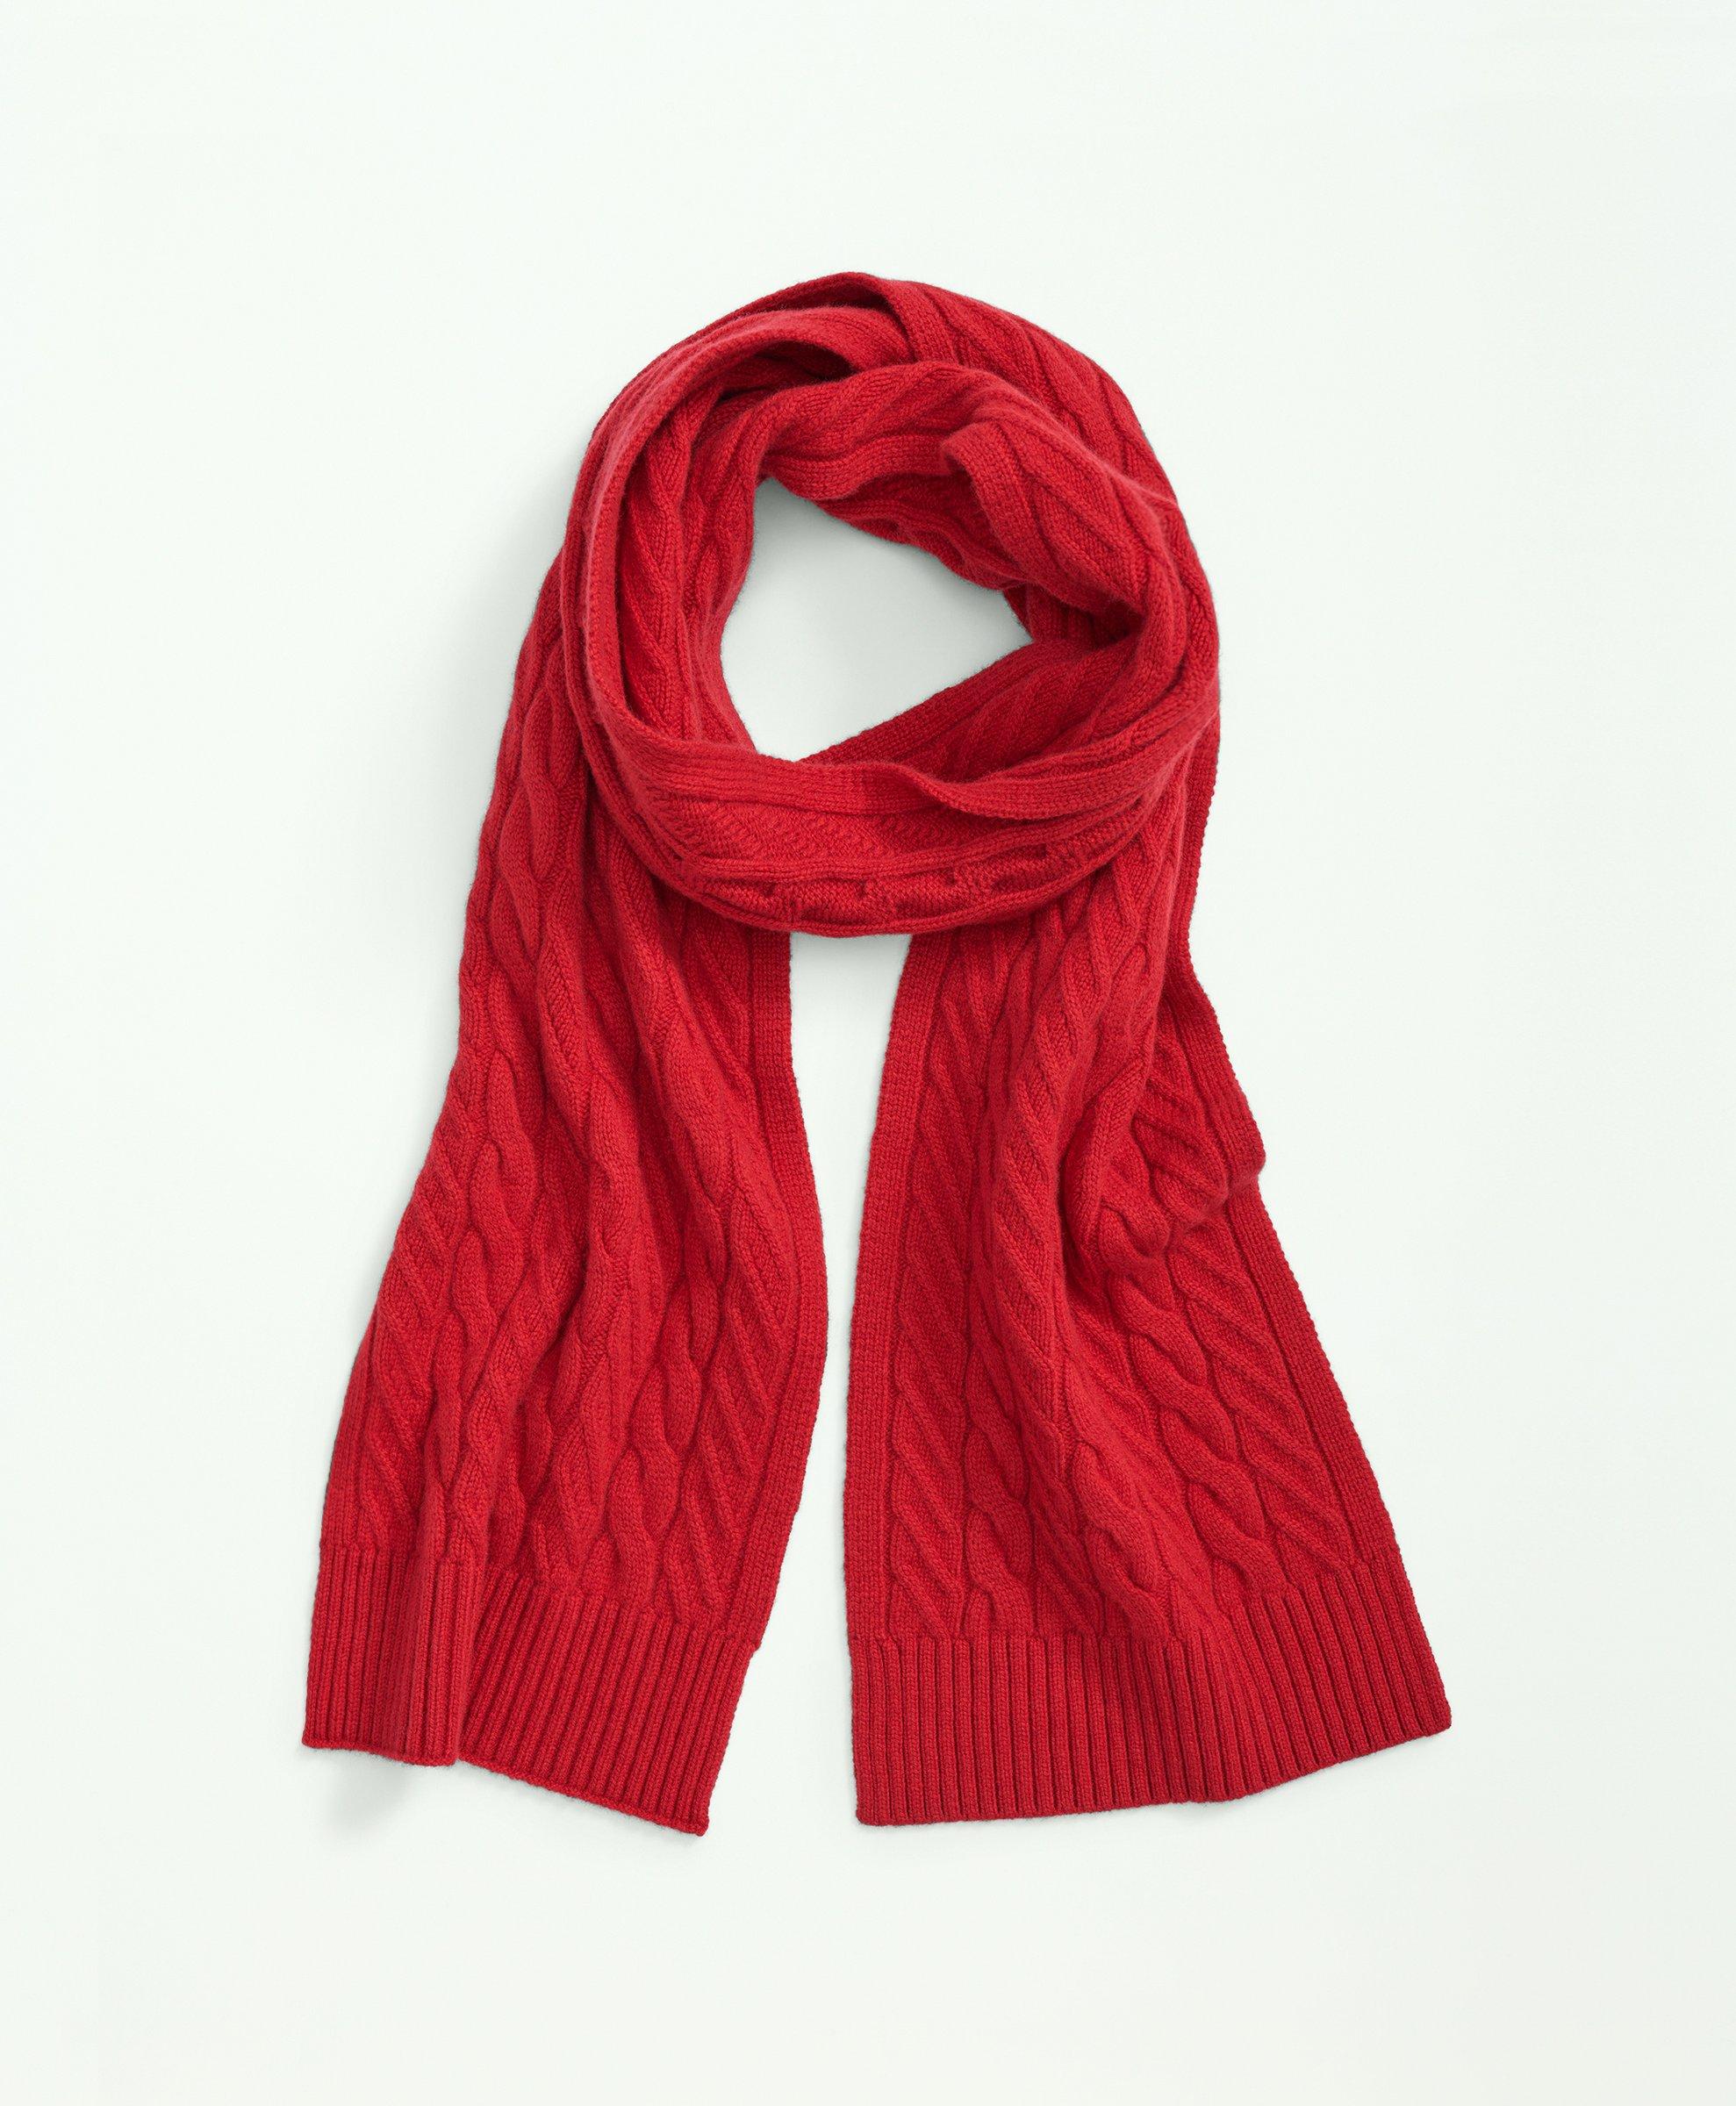 Merino Wool and Cashmere Blend Cable Knit Scarf, image 1